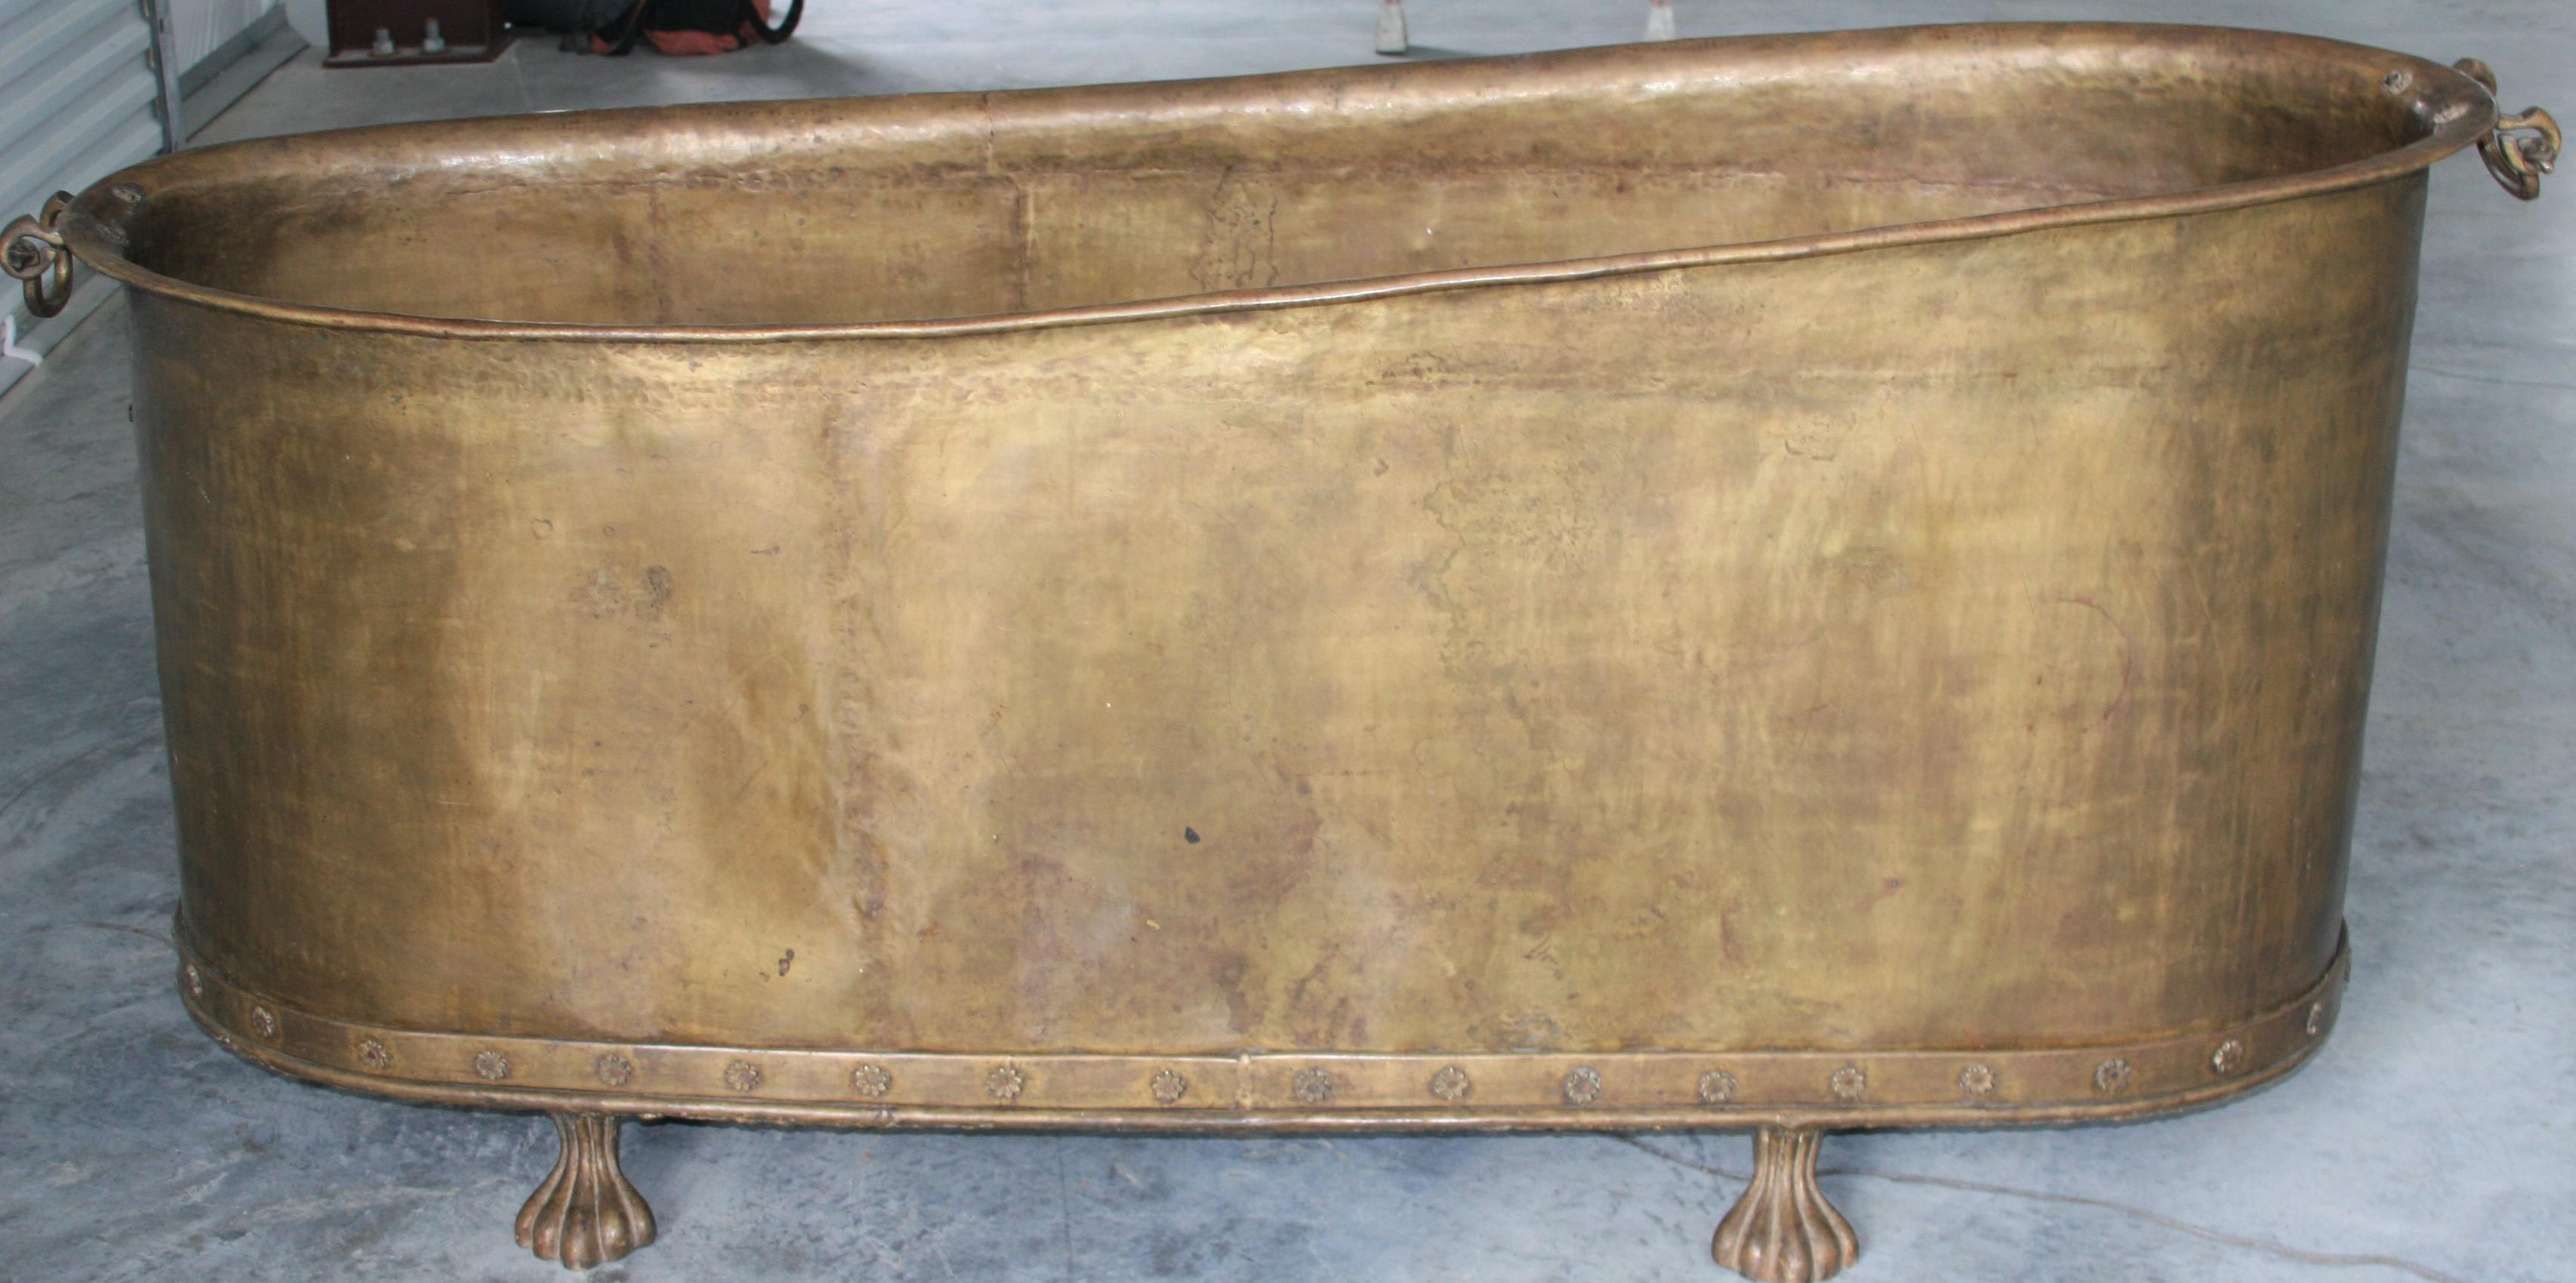 Vintage Hand Hammered Copper Alloy Freestanding Bath Tub Featuring Claw Feet     6